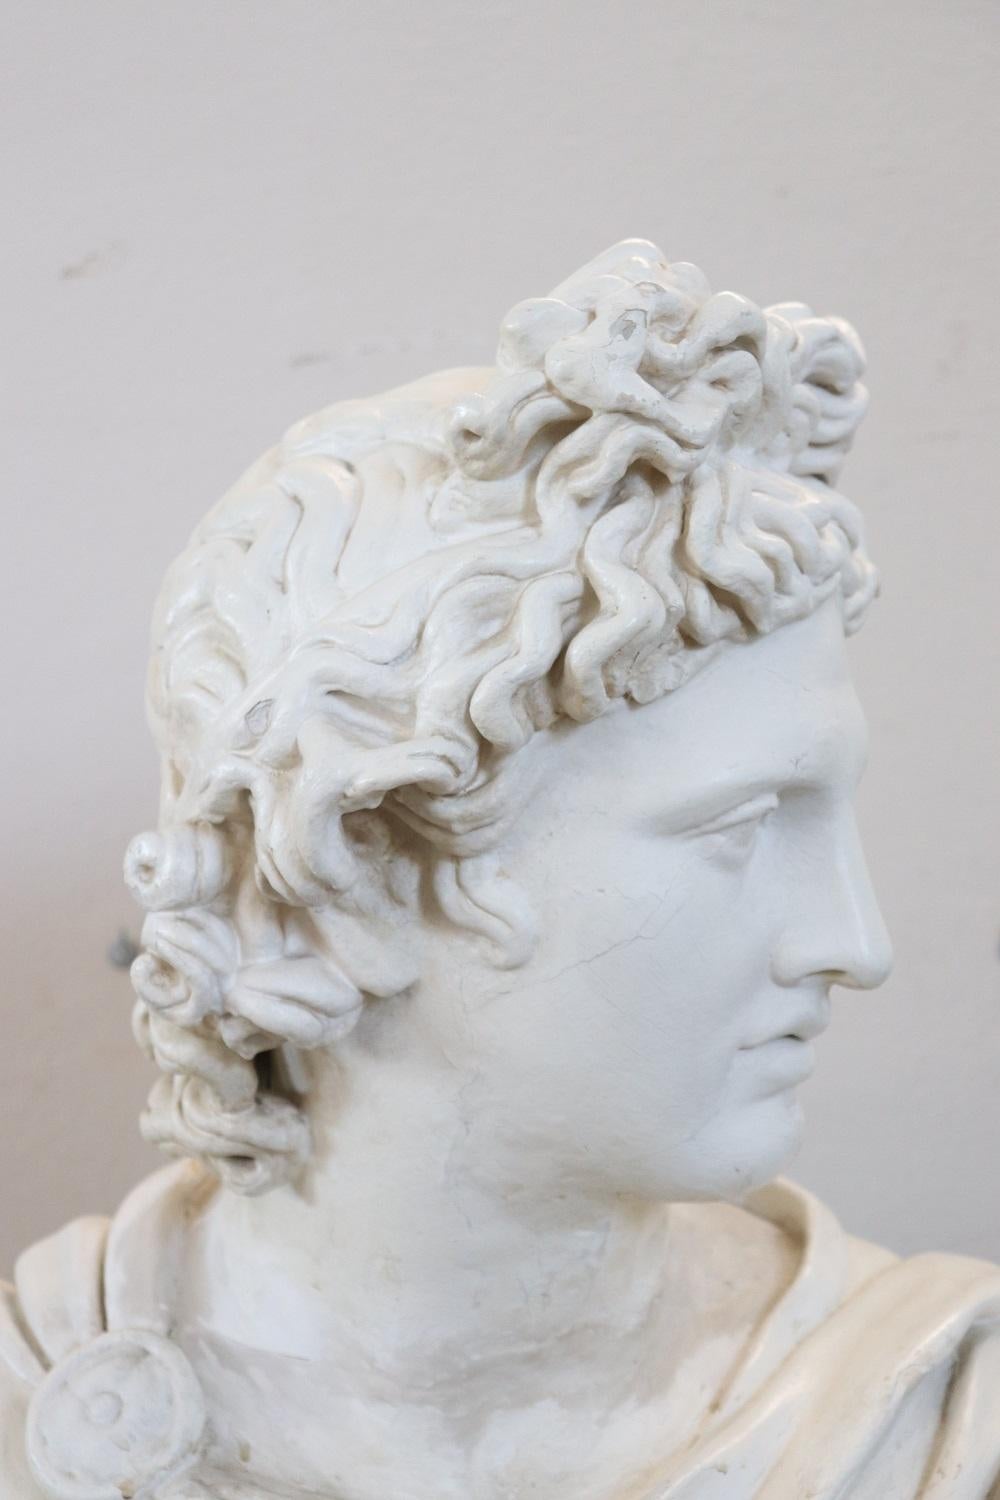 Refined Italian sculpture in plaster. The bust is a reproduction of a famous marble statue 